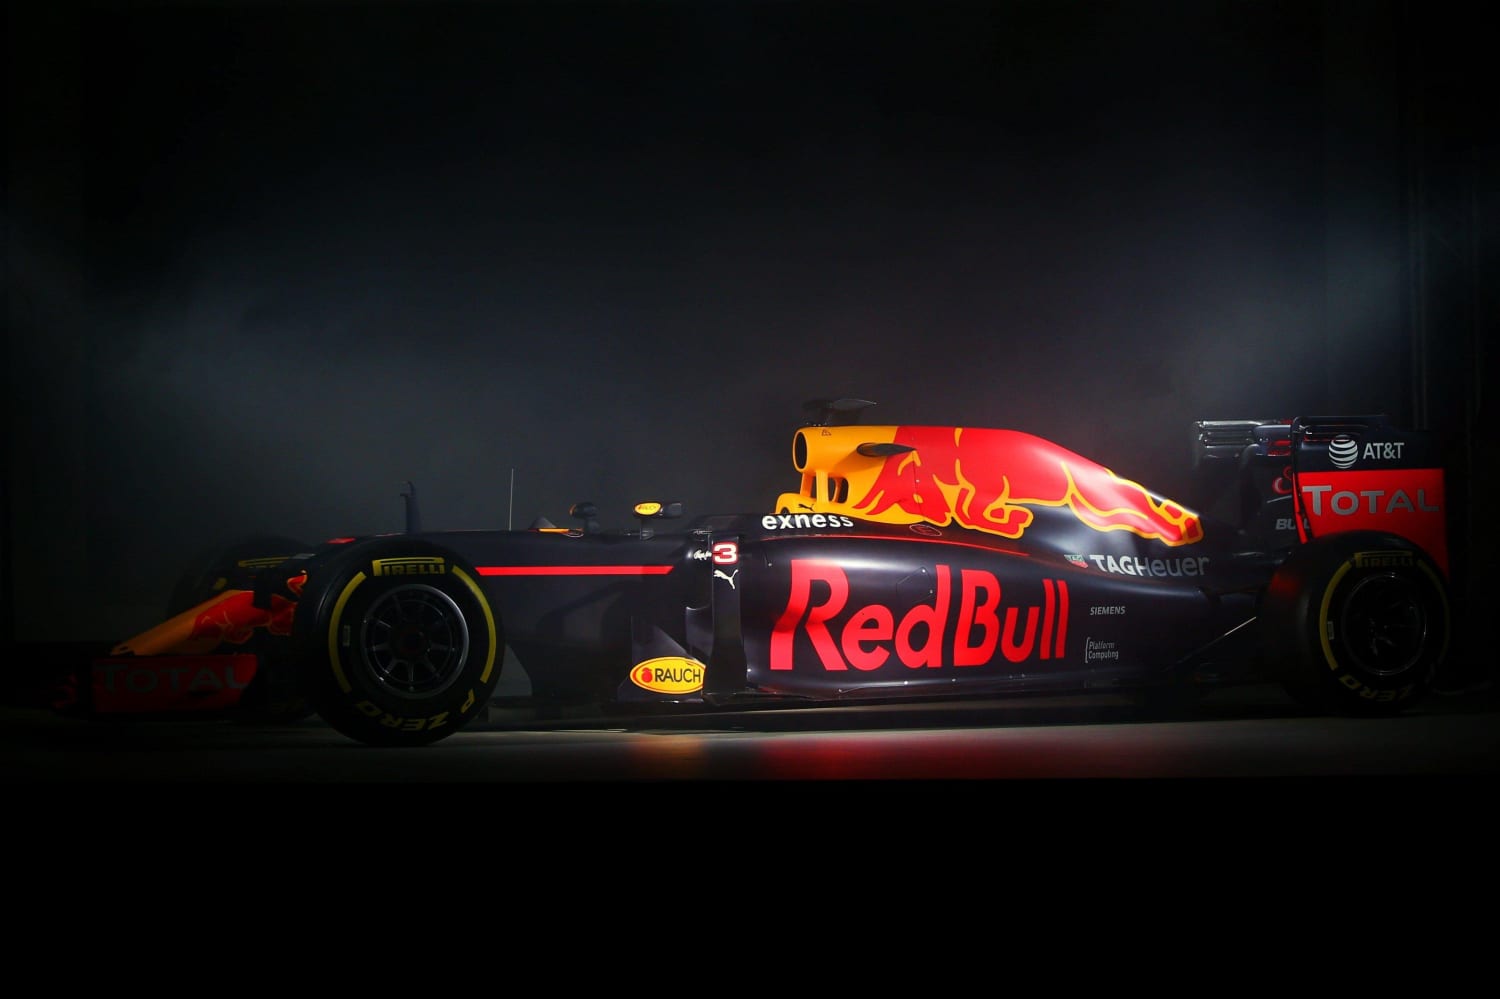 Red Bull 2016 livery